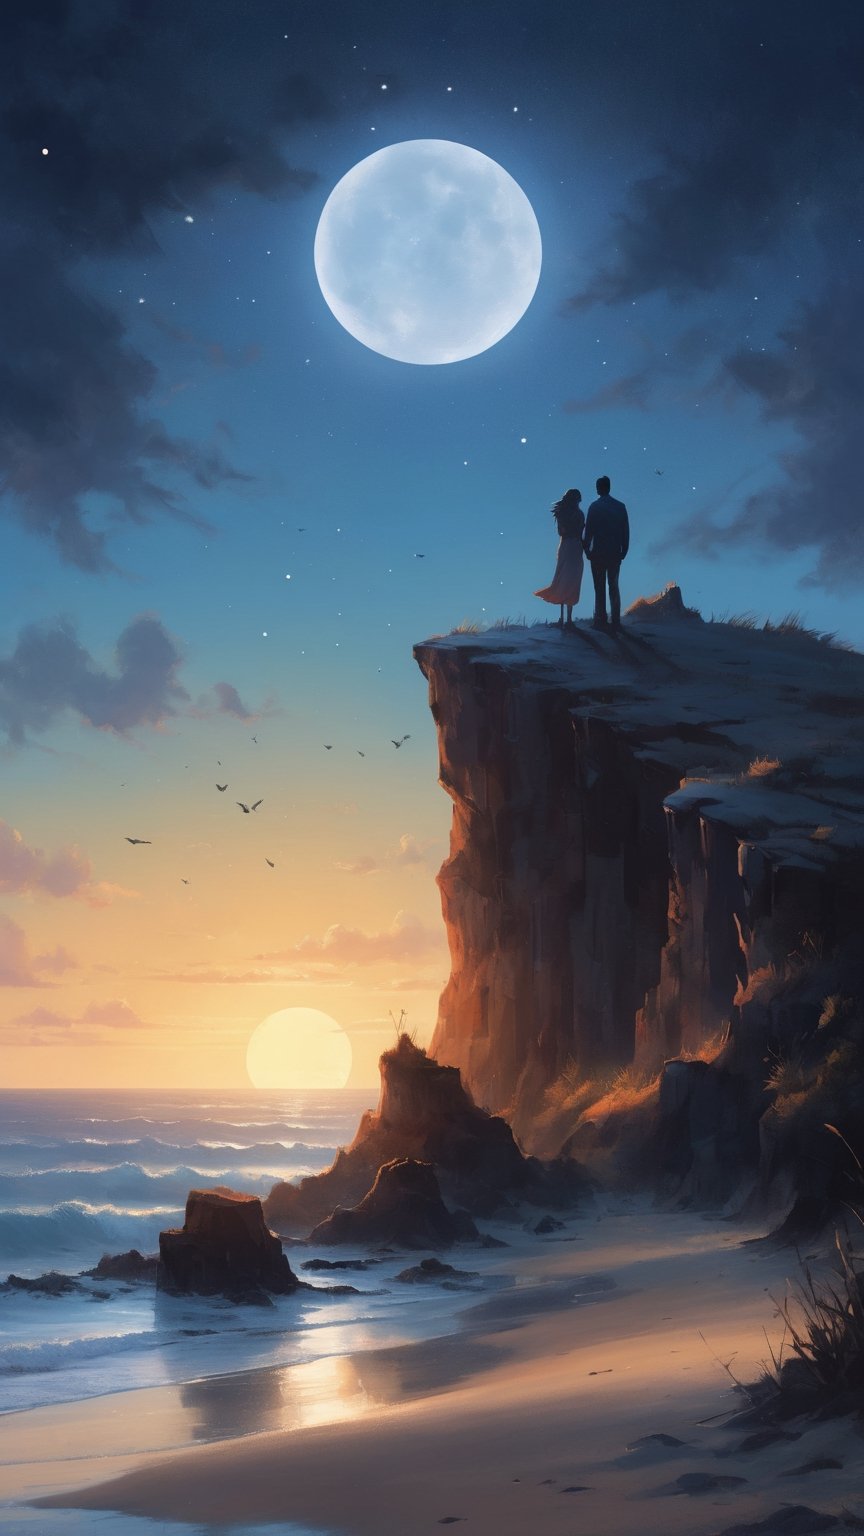 Nestled on a moonlit beach, a couple perches on a rugged rock formation. The moon hangs low in the sky, casting a radiant path across the water's surface. The couple's figures are silhouetted against the moonlight, their hands interlocked. The beach around them is a blend of smooth sand and scattered seashells. Tall grasses sway gently in the breeze, and a hint of a bonfire's warmth wafts through the air. Stars twinkle overhead, enhancing the mystical atmosphere. The scene exudes a mix of adventure and serenity, evoking a sense of endless possibilities. An intricate papercraft artwork that plays with layers and shadows to capture the moonlit textures and create a sense of depth, using delicate cuts and folds to form the scene.